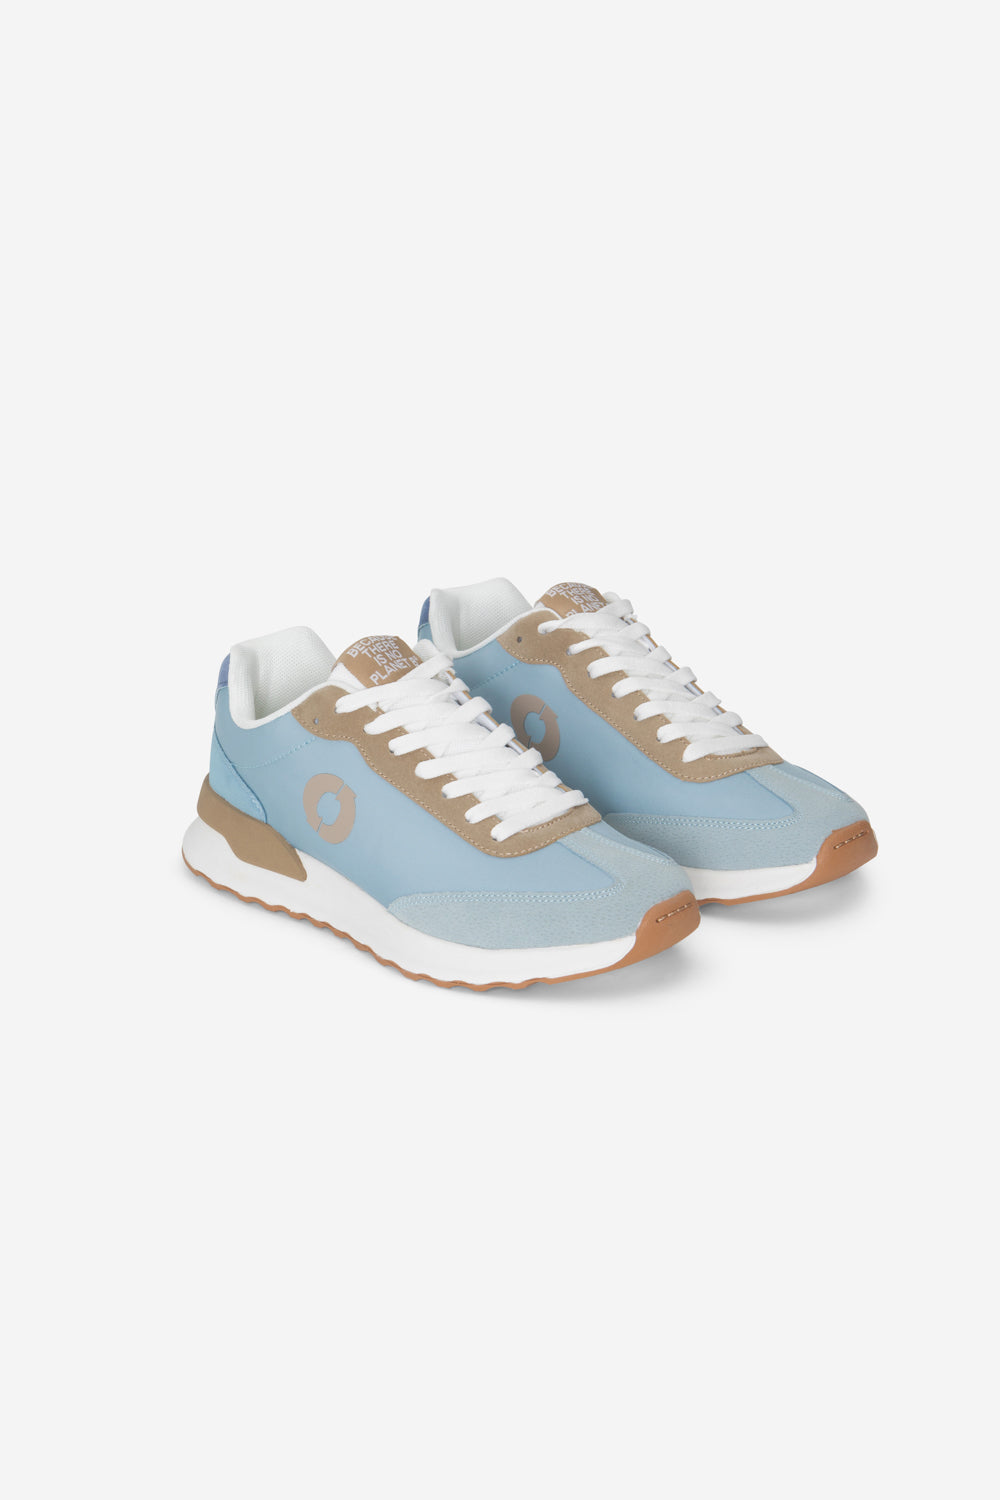 PRINCE TRAINERS BLUE